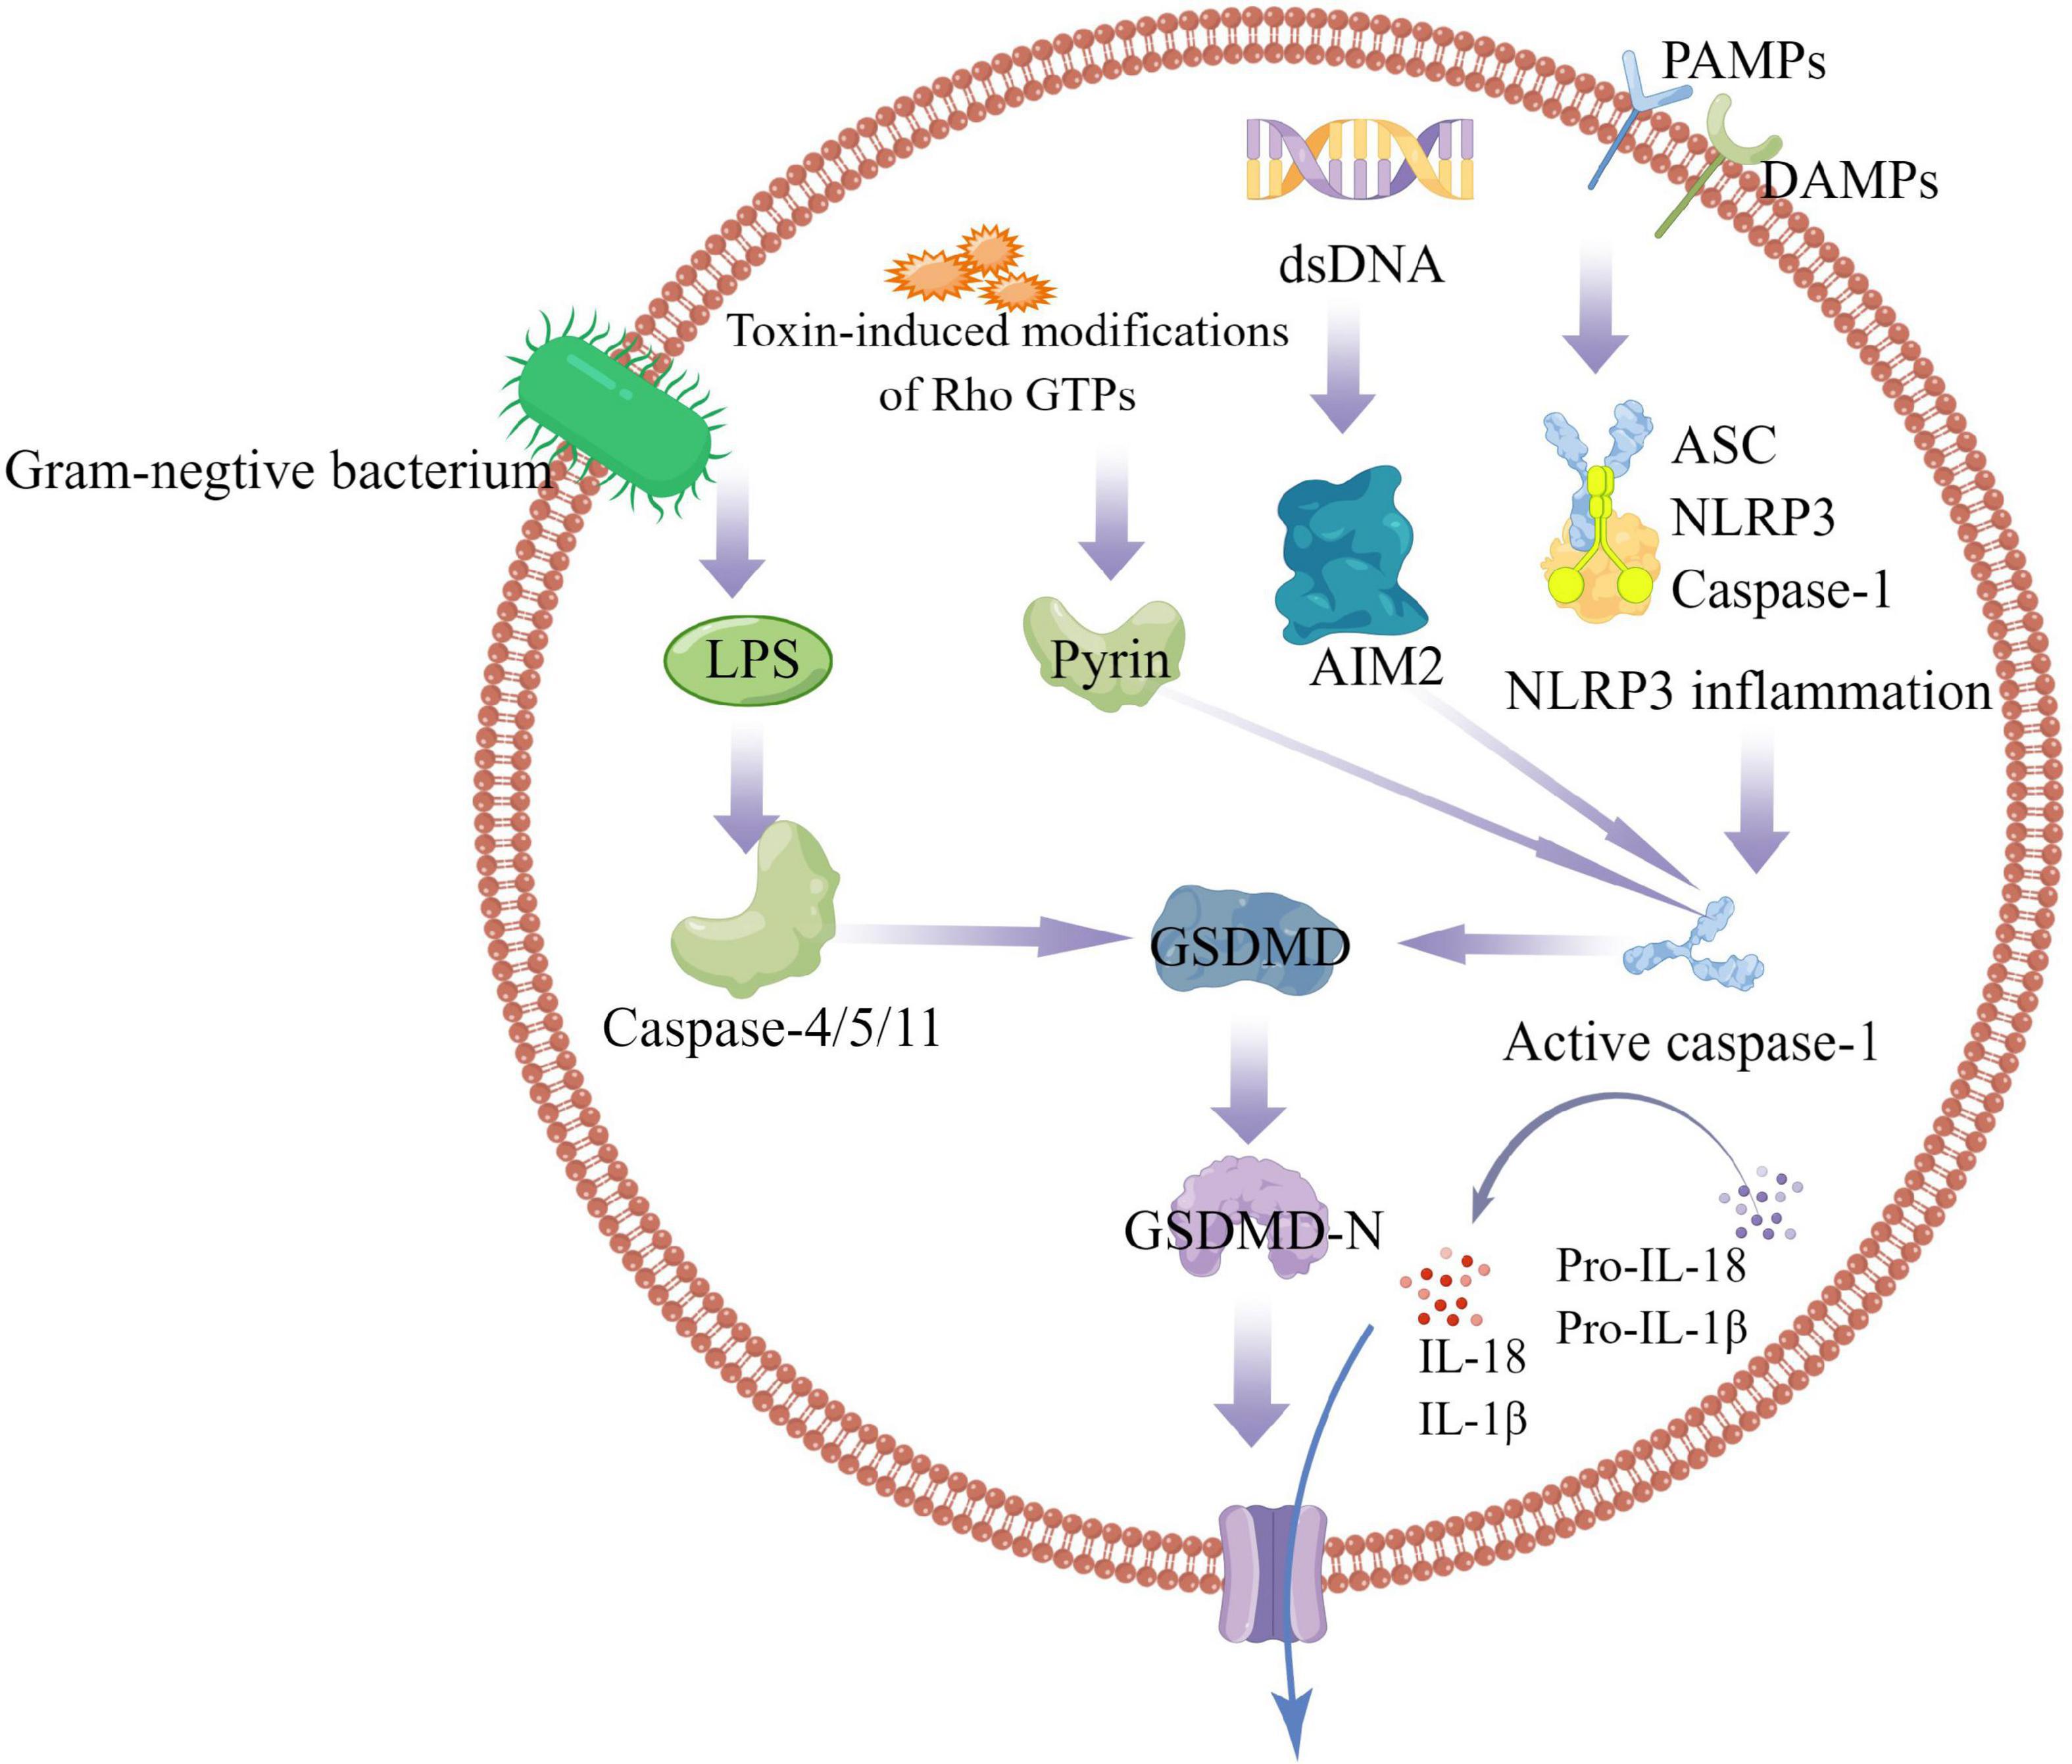 The role of ROS-induced pyroptosis in CVD